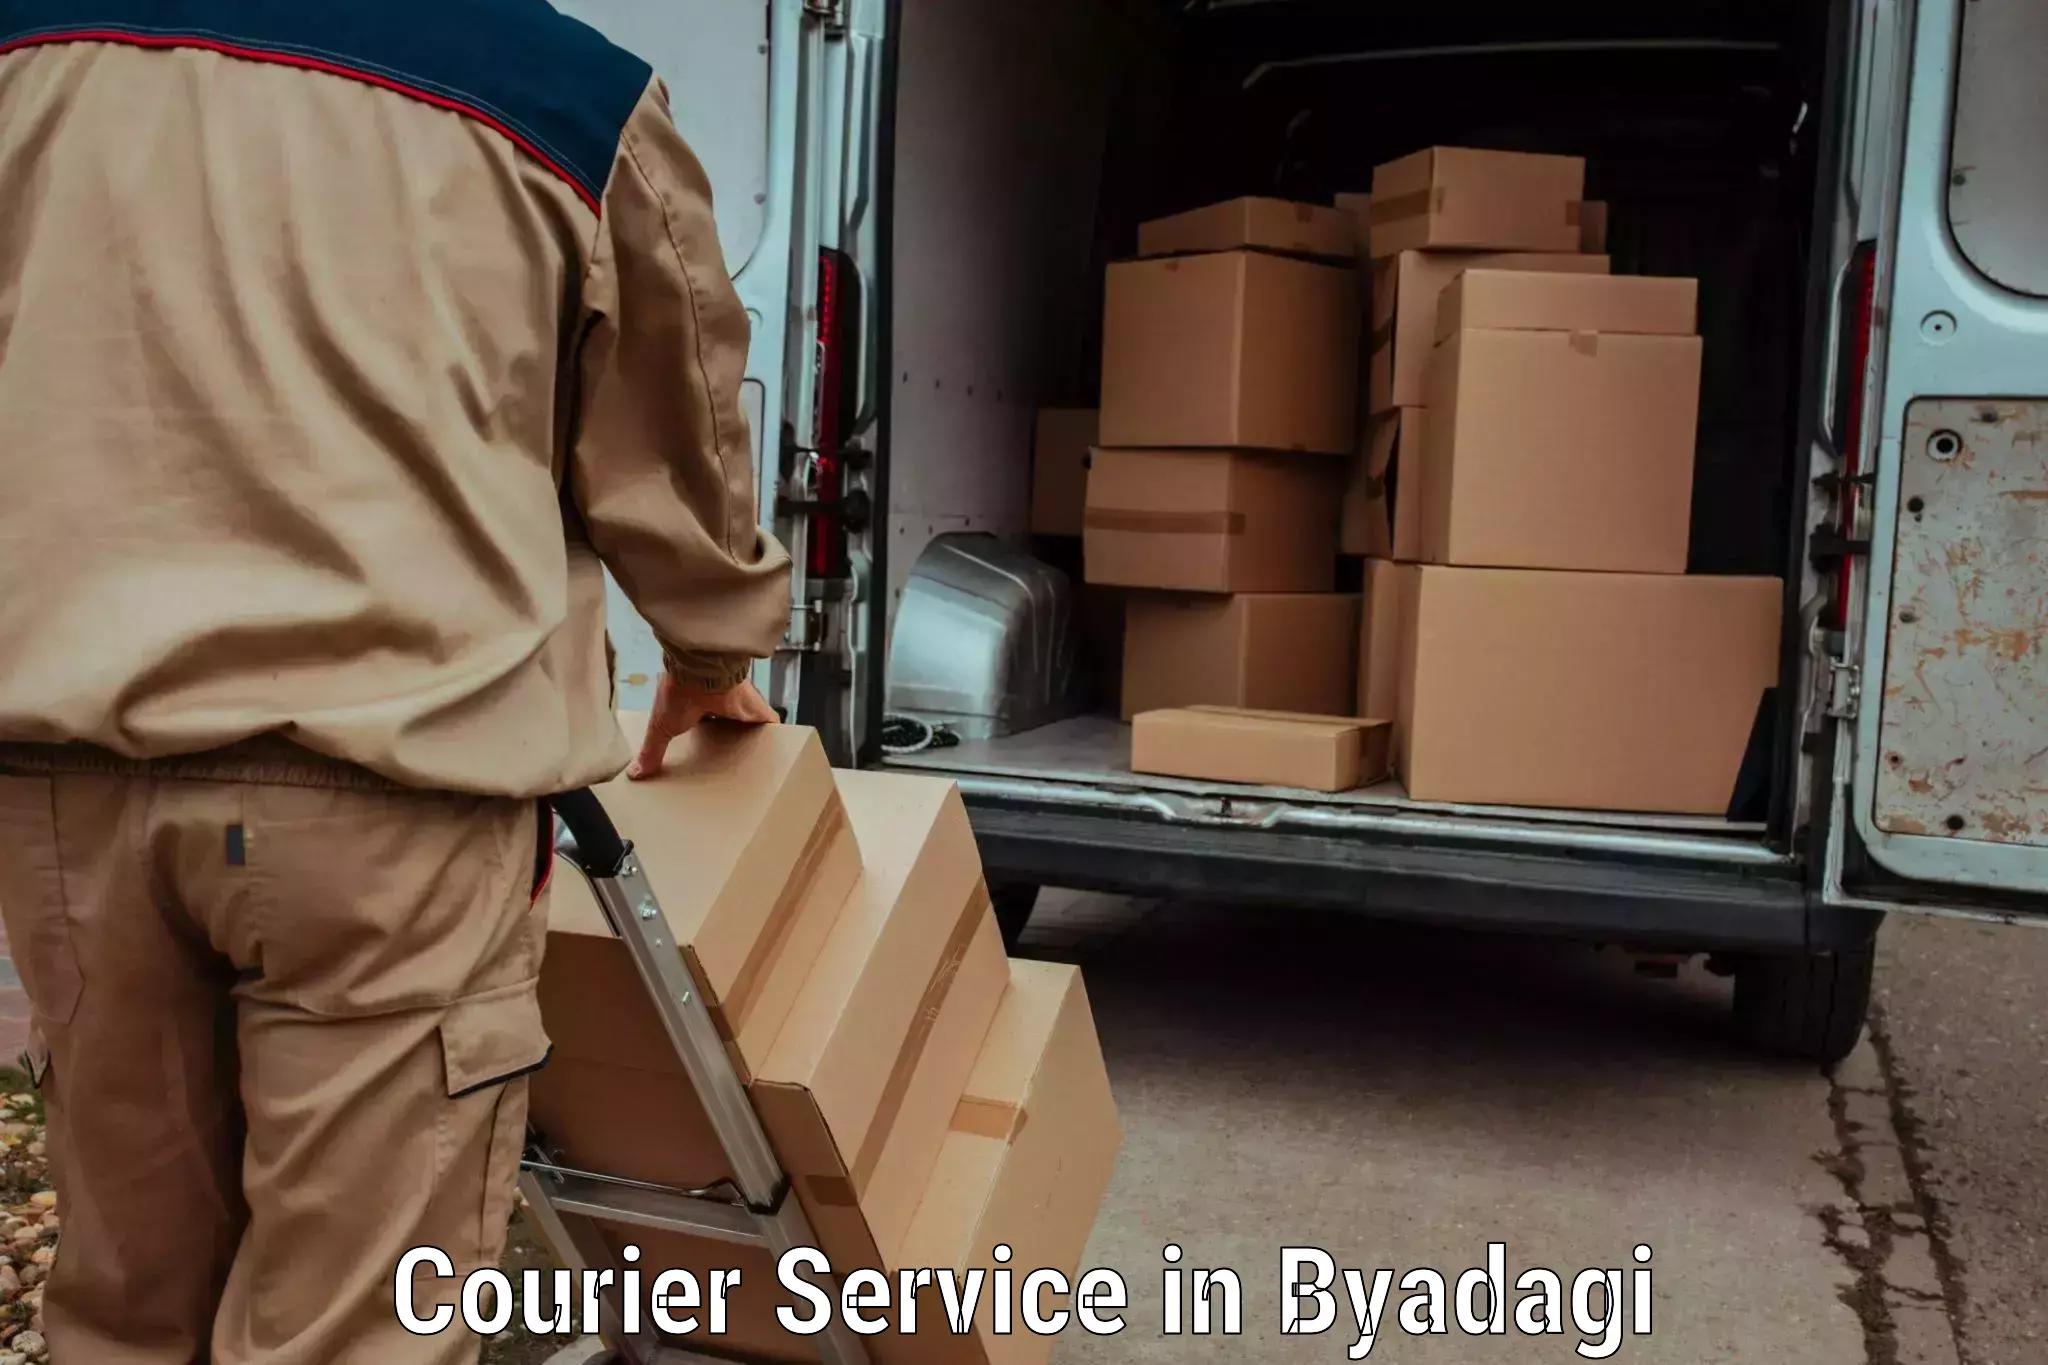 Courier dispatch services in Byadagi